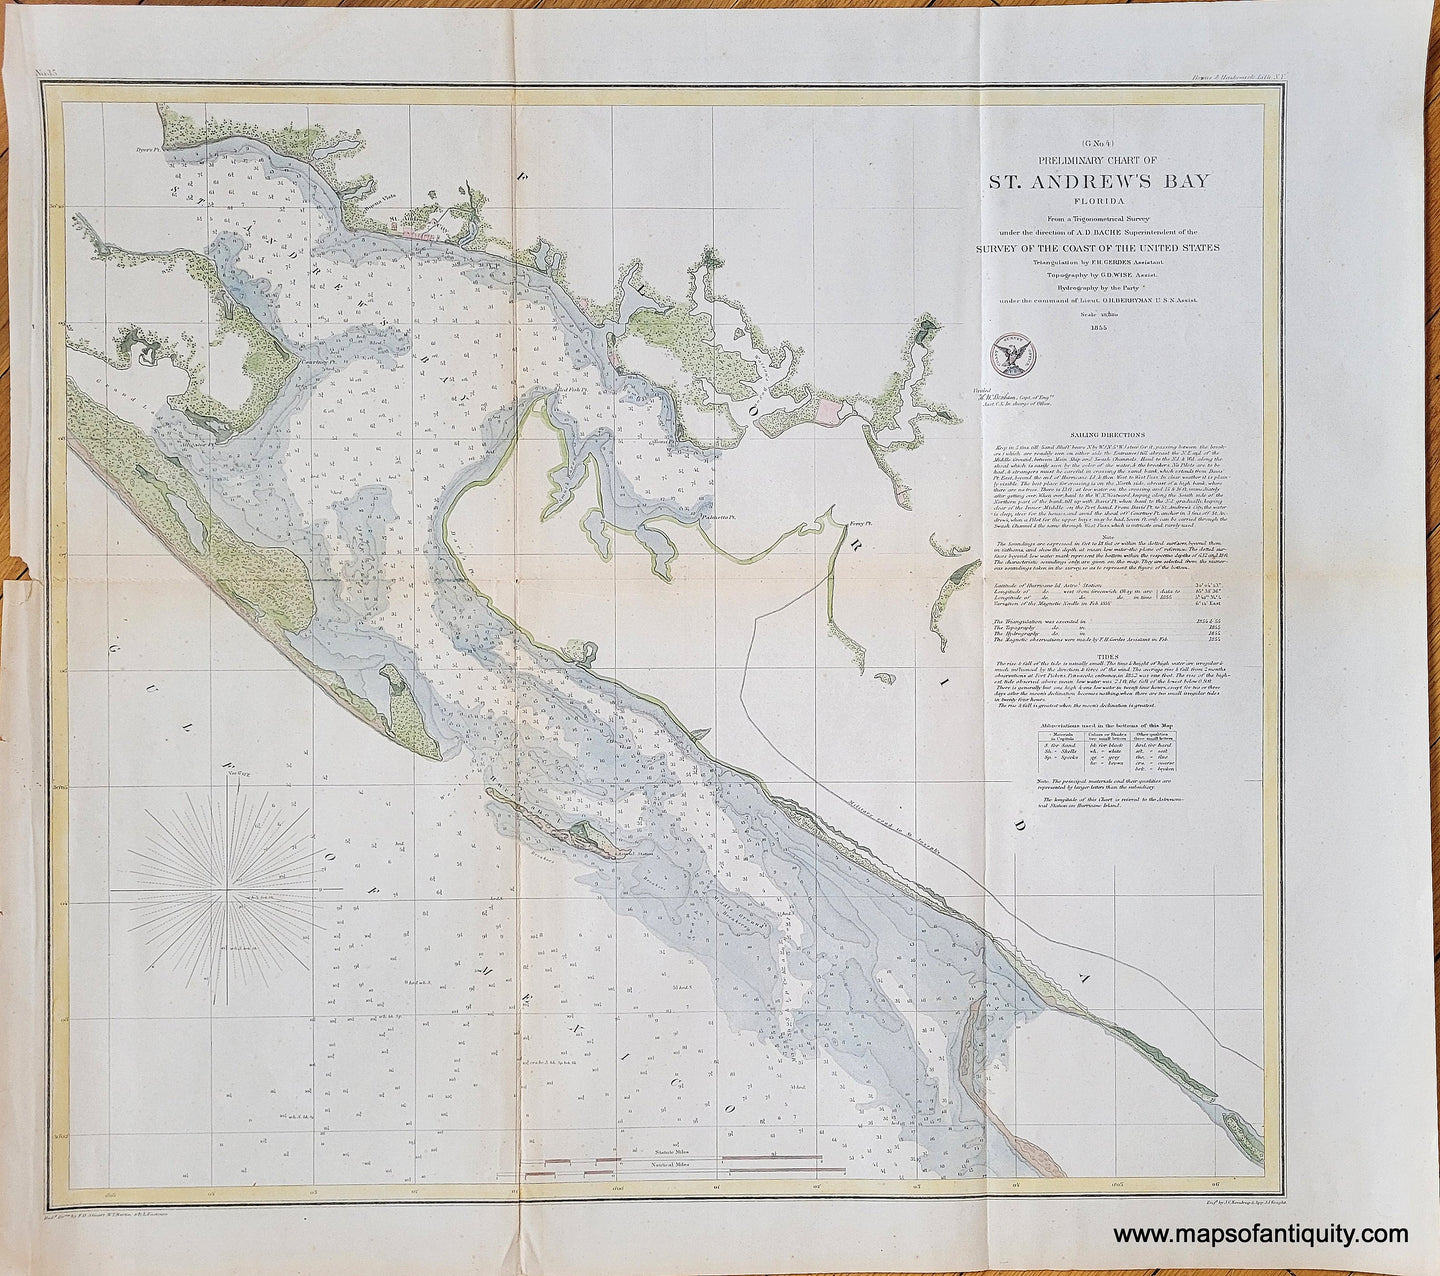 Genuine-Antique-Coast-Survey-Chart-Preliminary-Chart-of-St-Andrews-Bay-Florida-1855-USCS-Maps-Of-Antiquity